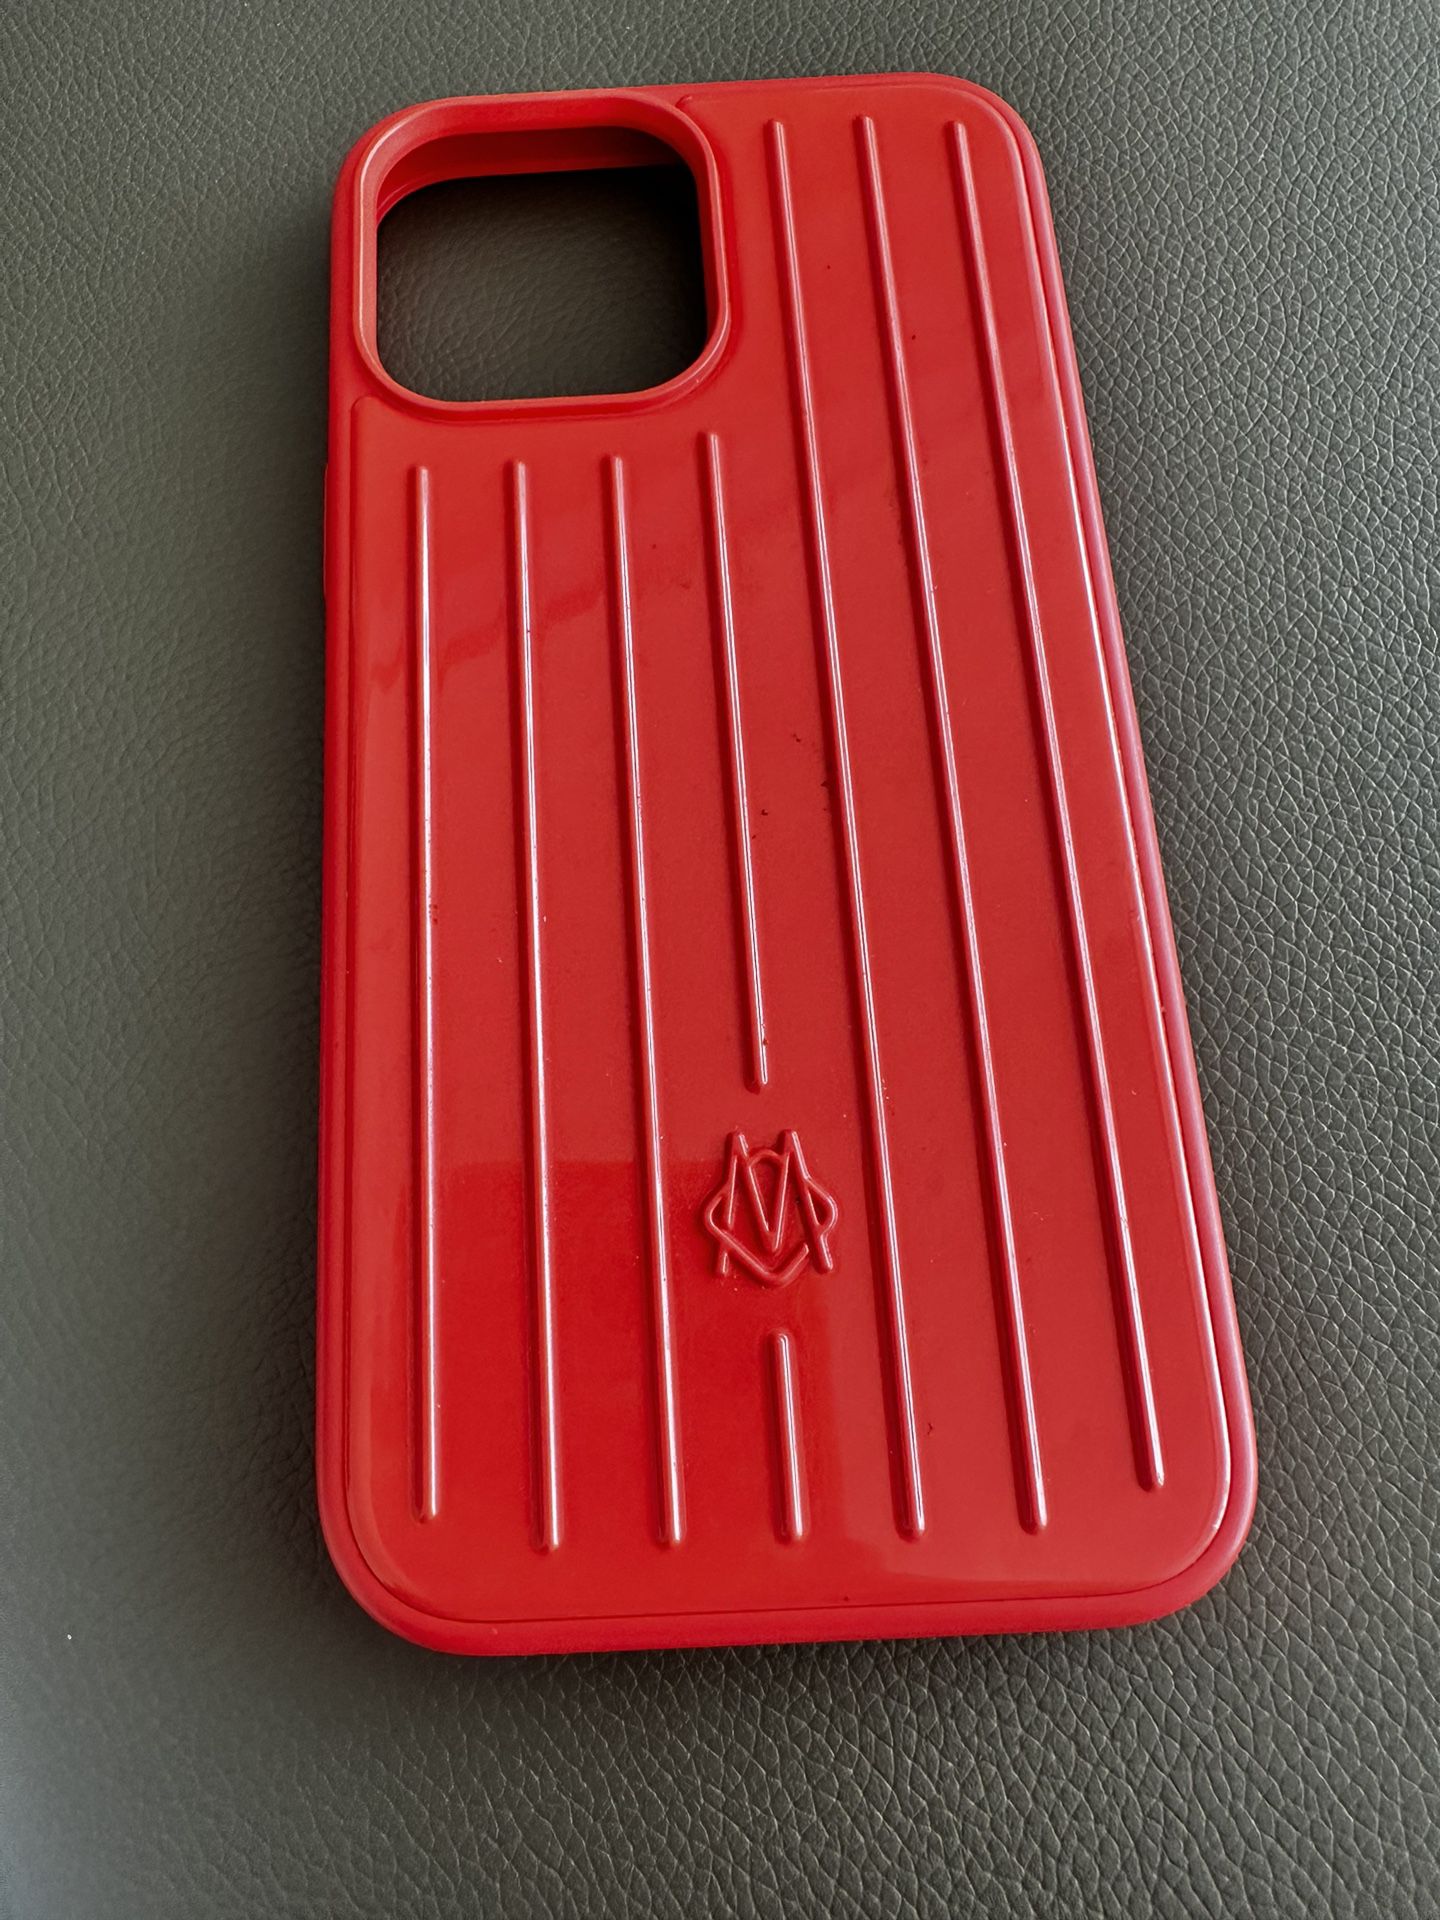 Rimowa Red Hard Case barely used Iphone case